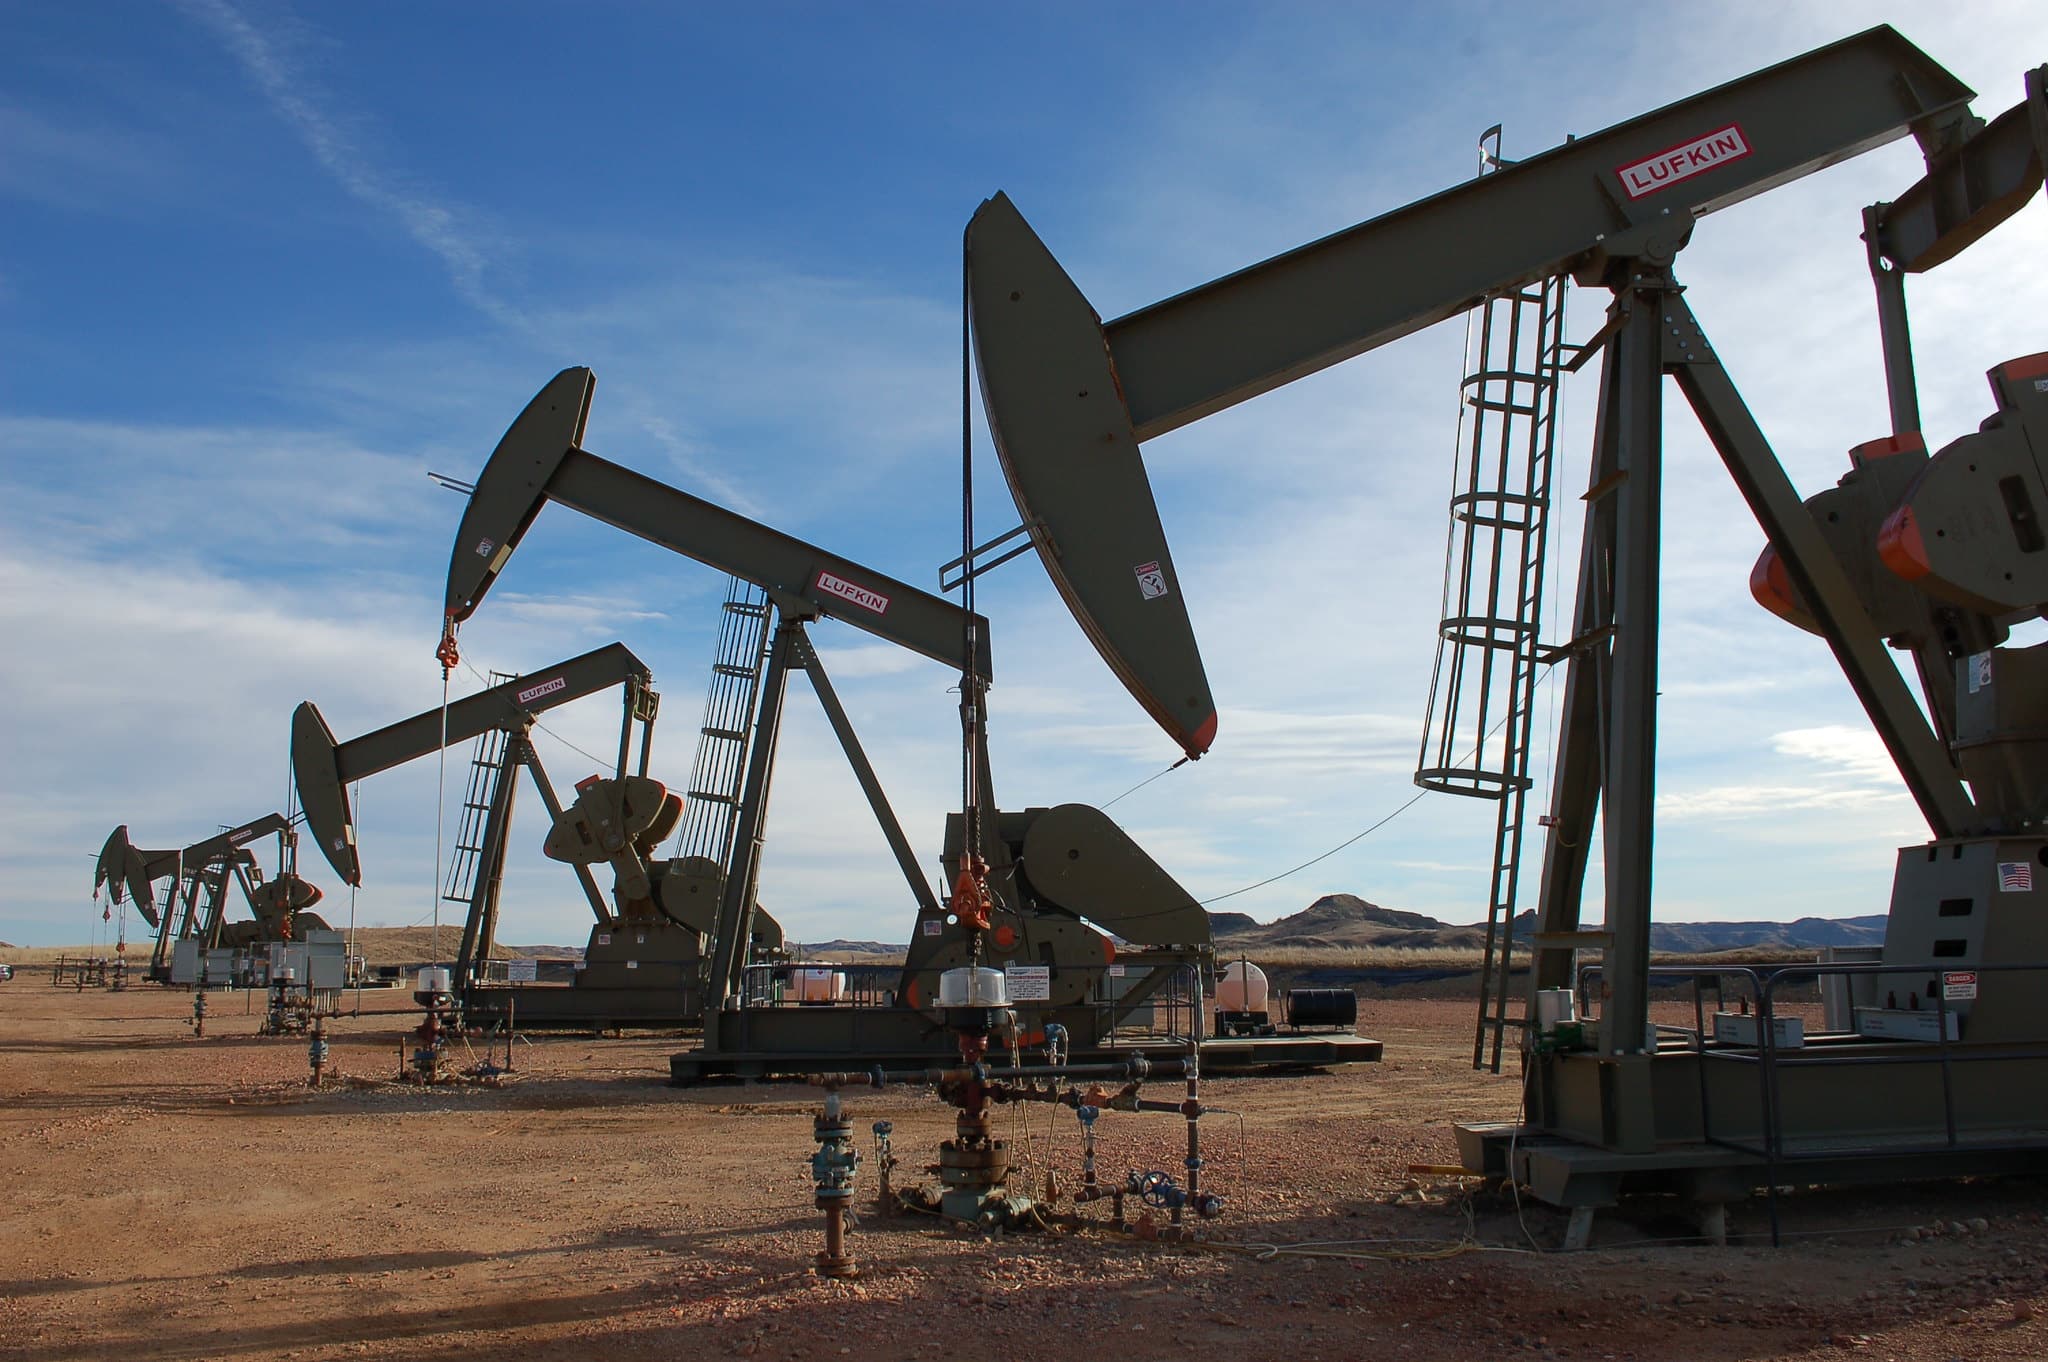 A row of oil pumpjacks with a cloudy blue sky in the background